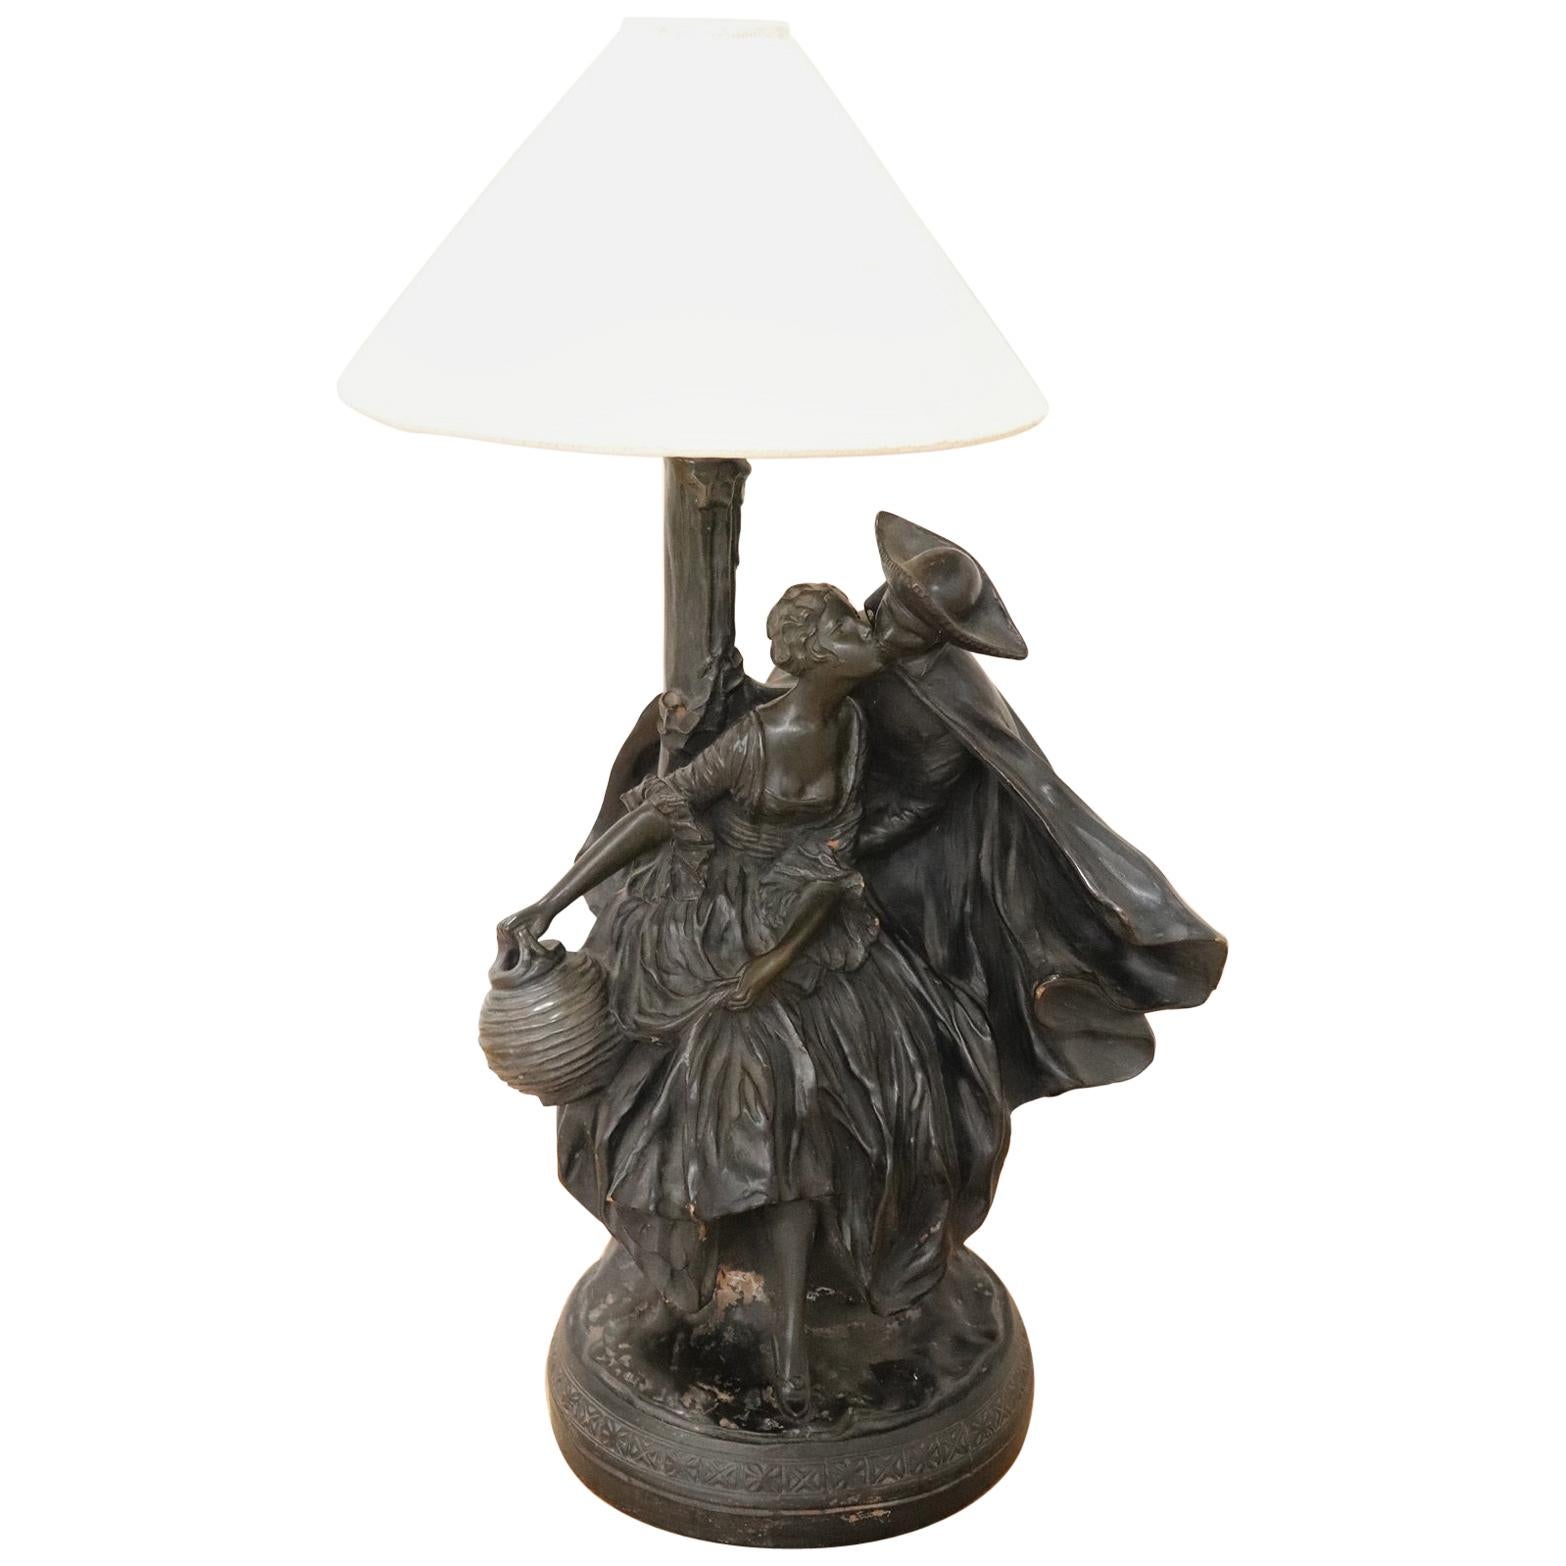 20th Century Art Nouveau Table Lamp with Sculpture in Clay, Couple in Love 1920s